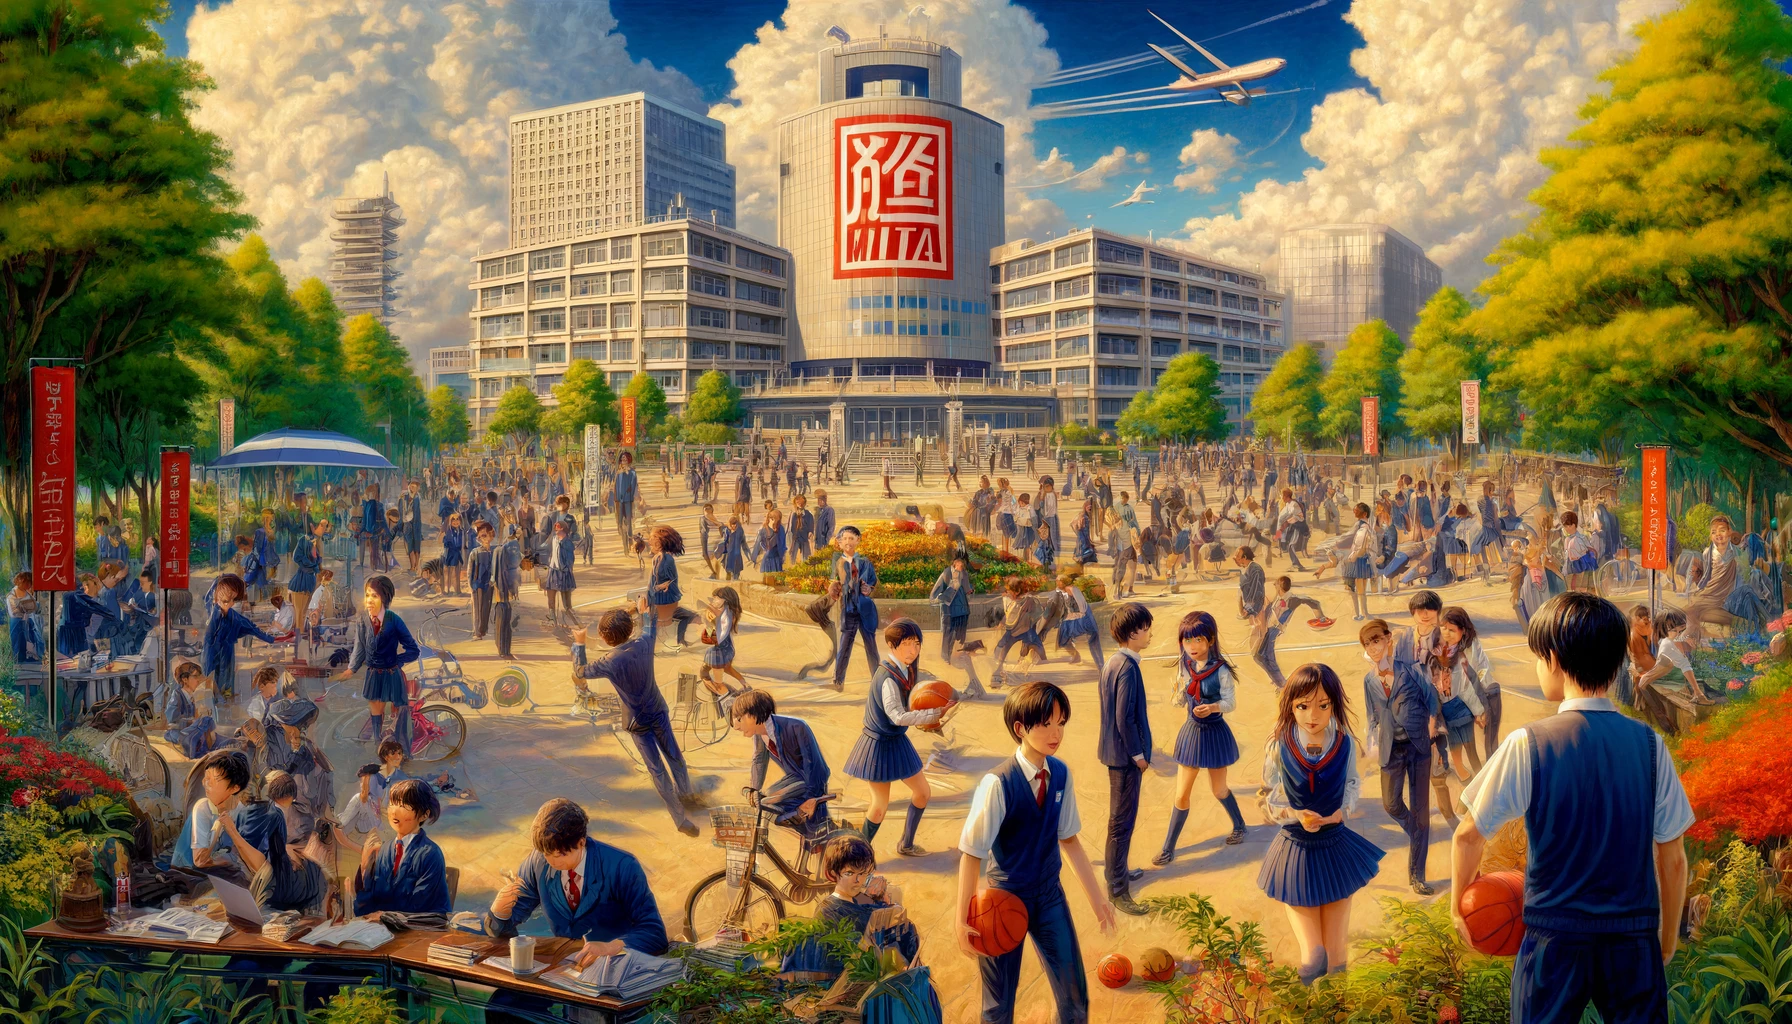 A lively and bustling high school campus scene depicting the popularity of Mita High School in Japan, with the word 'Mita' prominently displayed in both the foreground and the sky. The image features a diverse group of students of various Asian descents, in school uniforms, actively participating in a variety of outdoor activities. The scene includes students engaged in discussions, sports, and studying in outdoor settings, with a backdrop of modern and traditional school buildings. The landscape is lush with trees and flowers, symbolizing a vibrant school life. The atmosphere is energetic and joyful, reflecting a highly regarded and active educational environment.